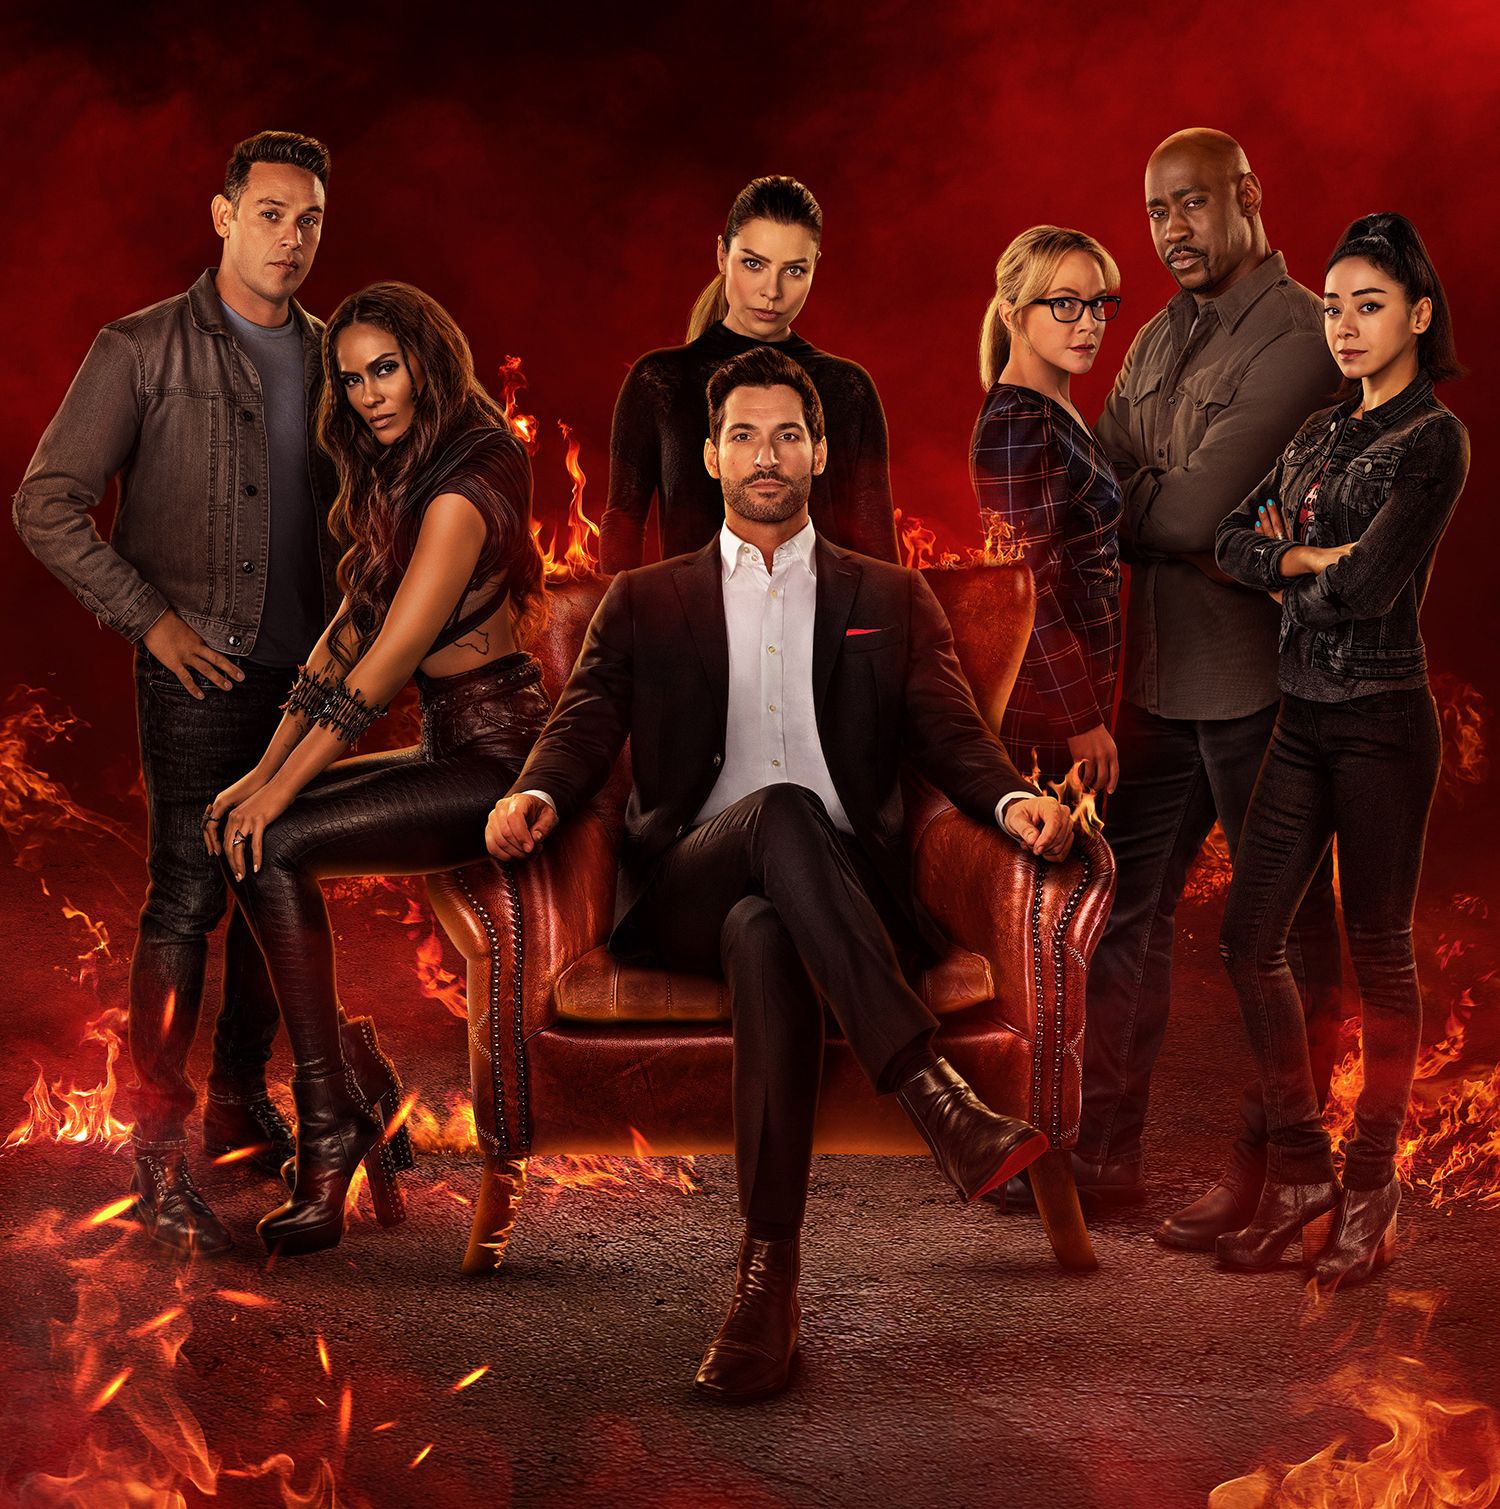 Lucifer Season 7: Why was the series canceled after 6 seasons?